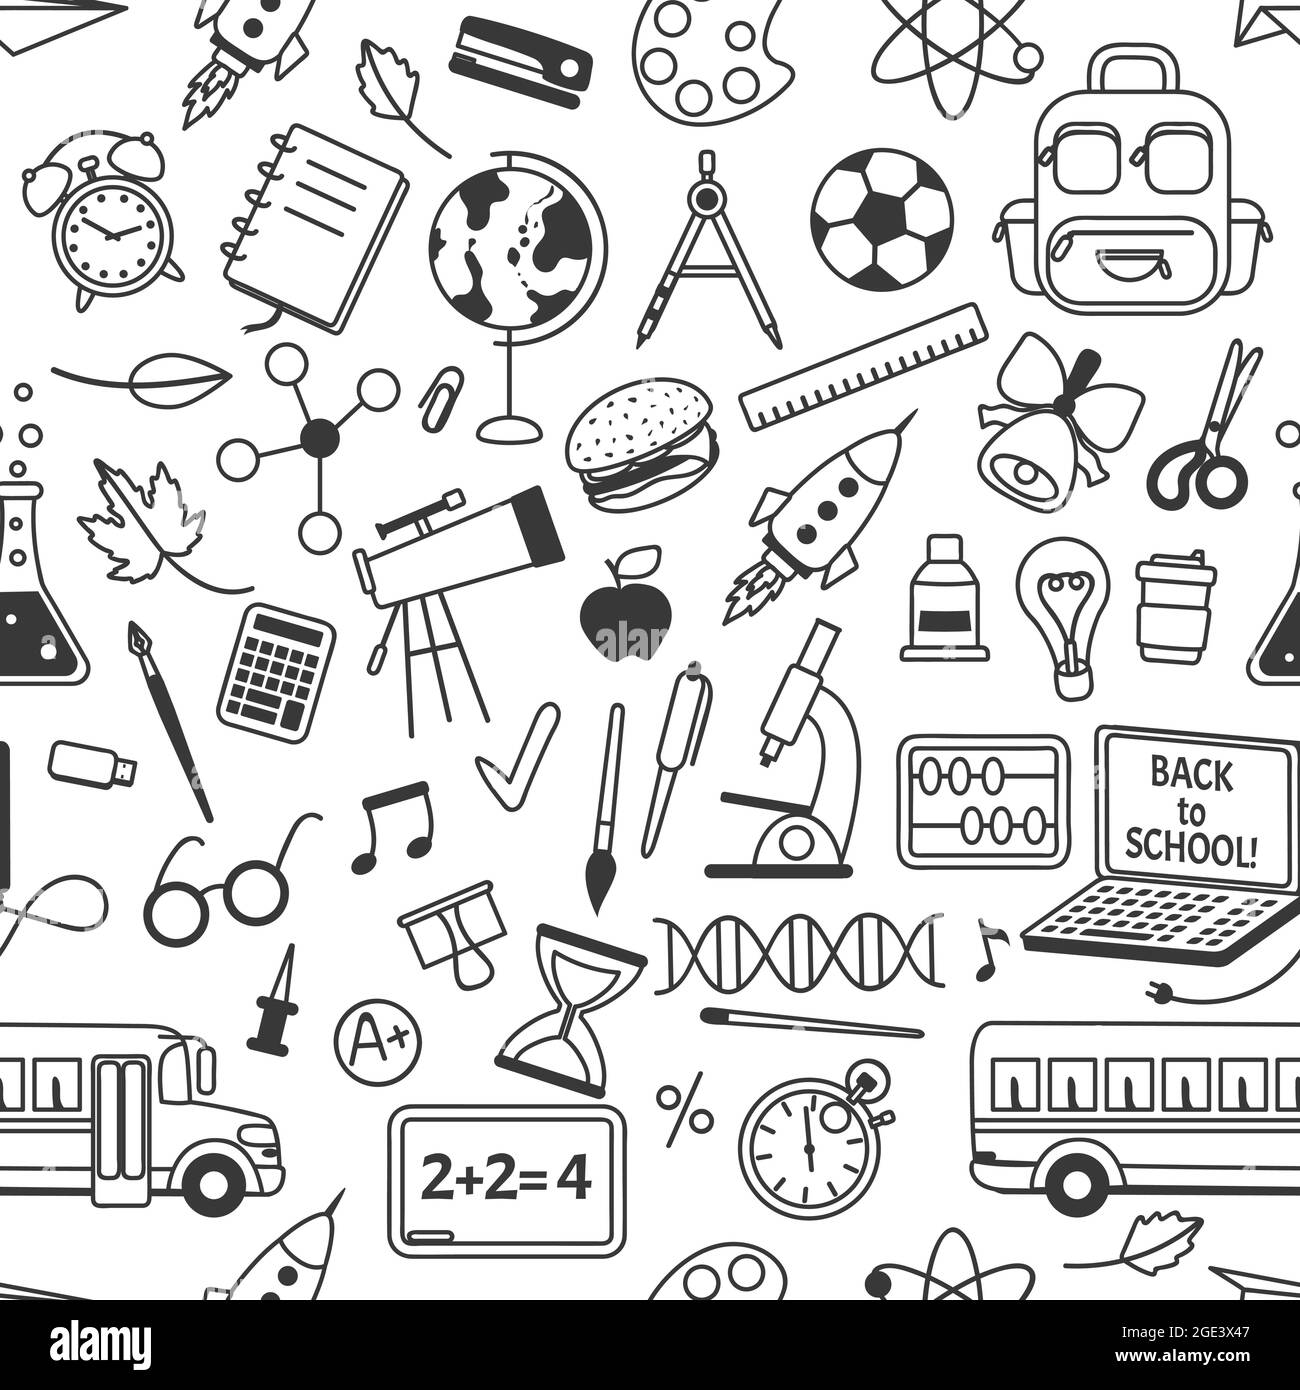 https://c8.alamy.com/comp/2GE3X47/school-doodles-seamless-pattern-with-school-stationery-hand-drawn-science-math-geography-elements-children-school-education-vector-background-equipment-and-supplies-for-studying-or-learning-2GE3X47.jpg